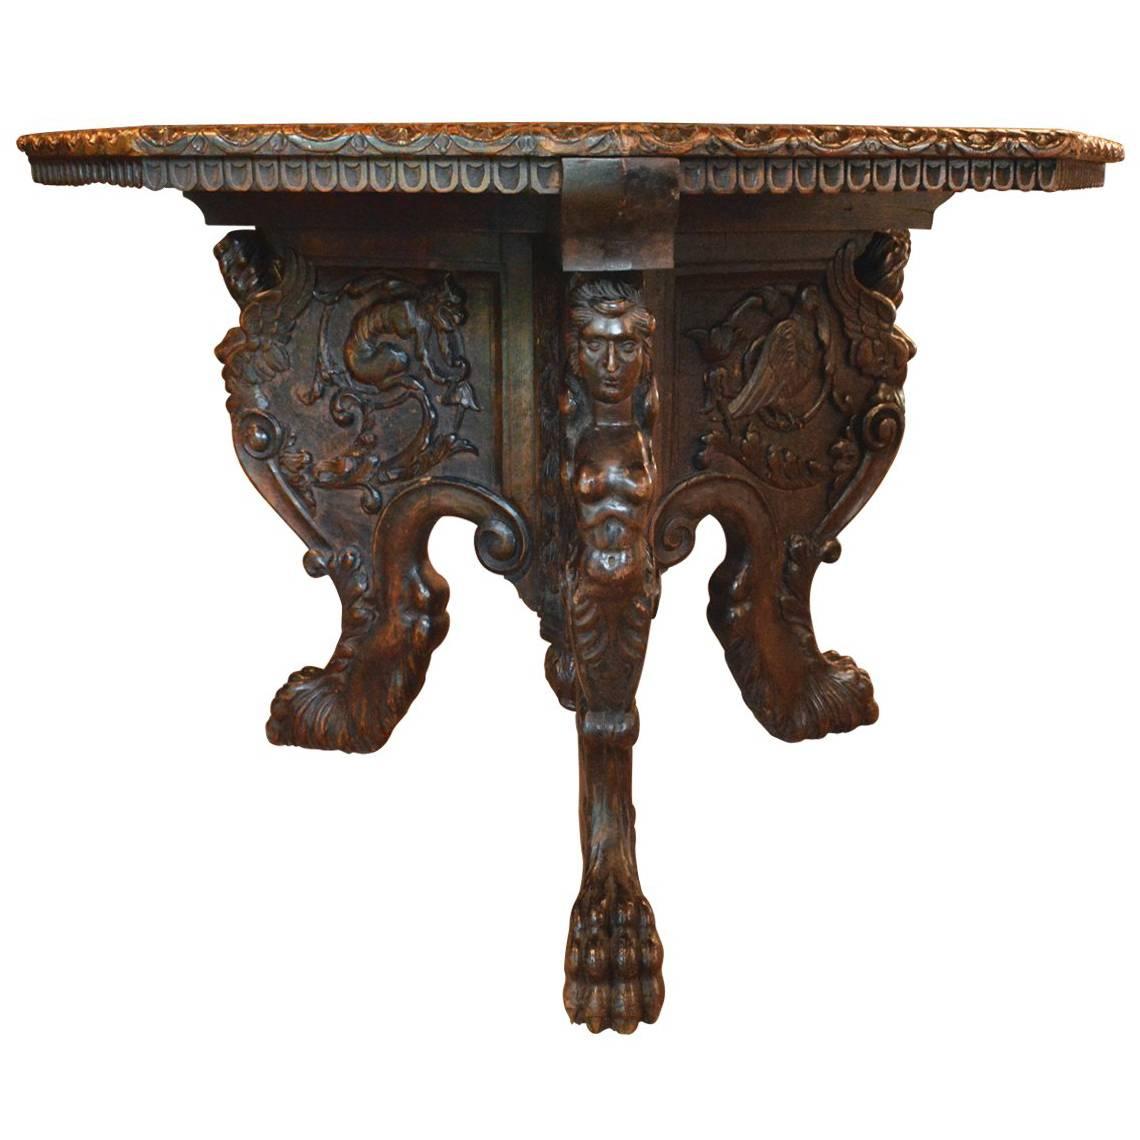 Magnificent Antique Italian Hand-Carved Centre Table